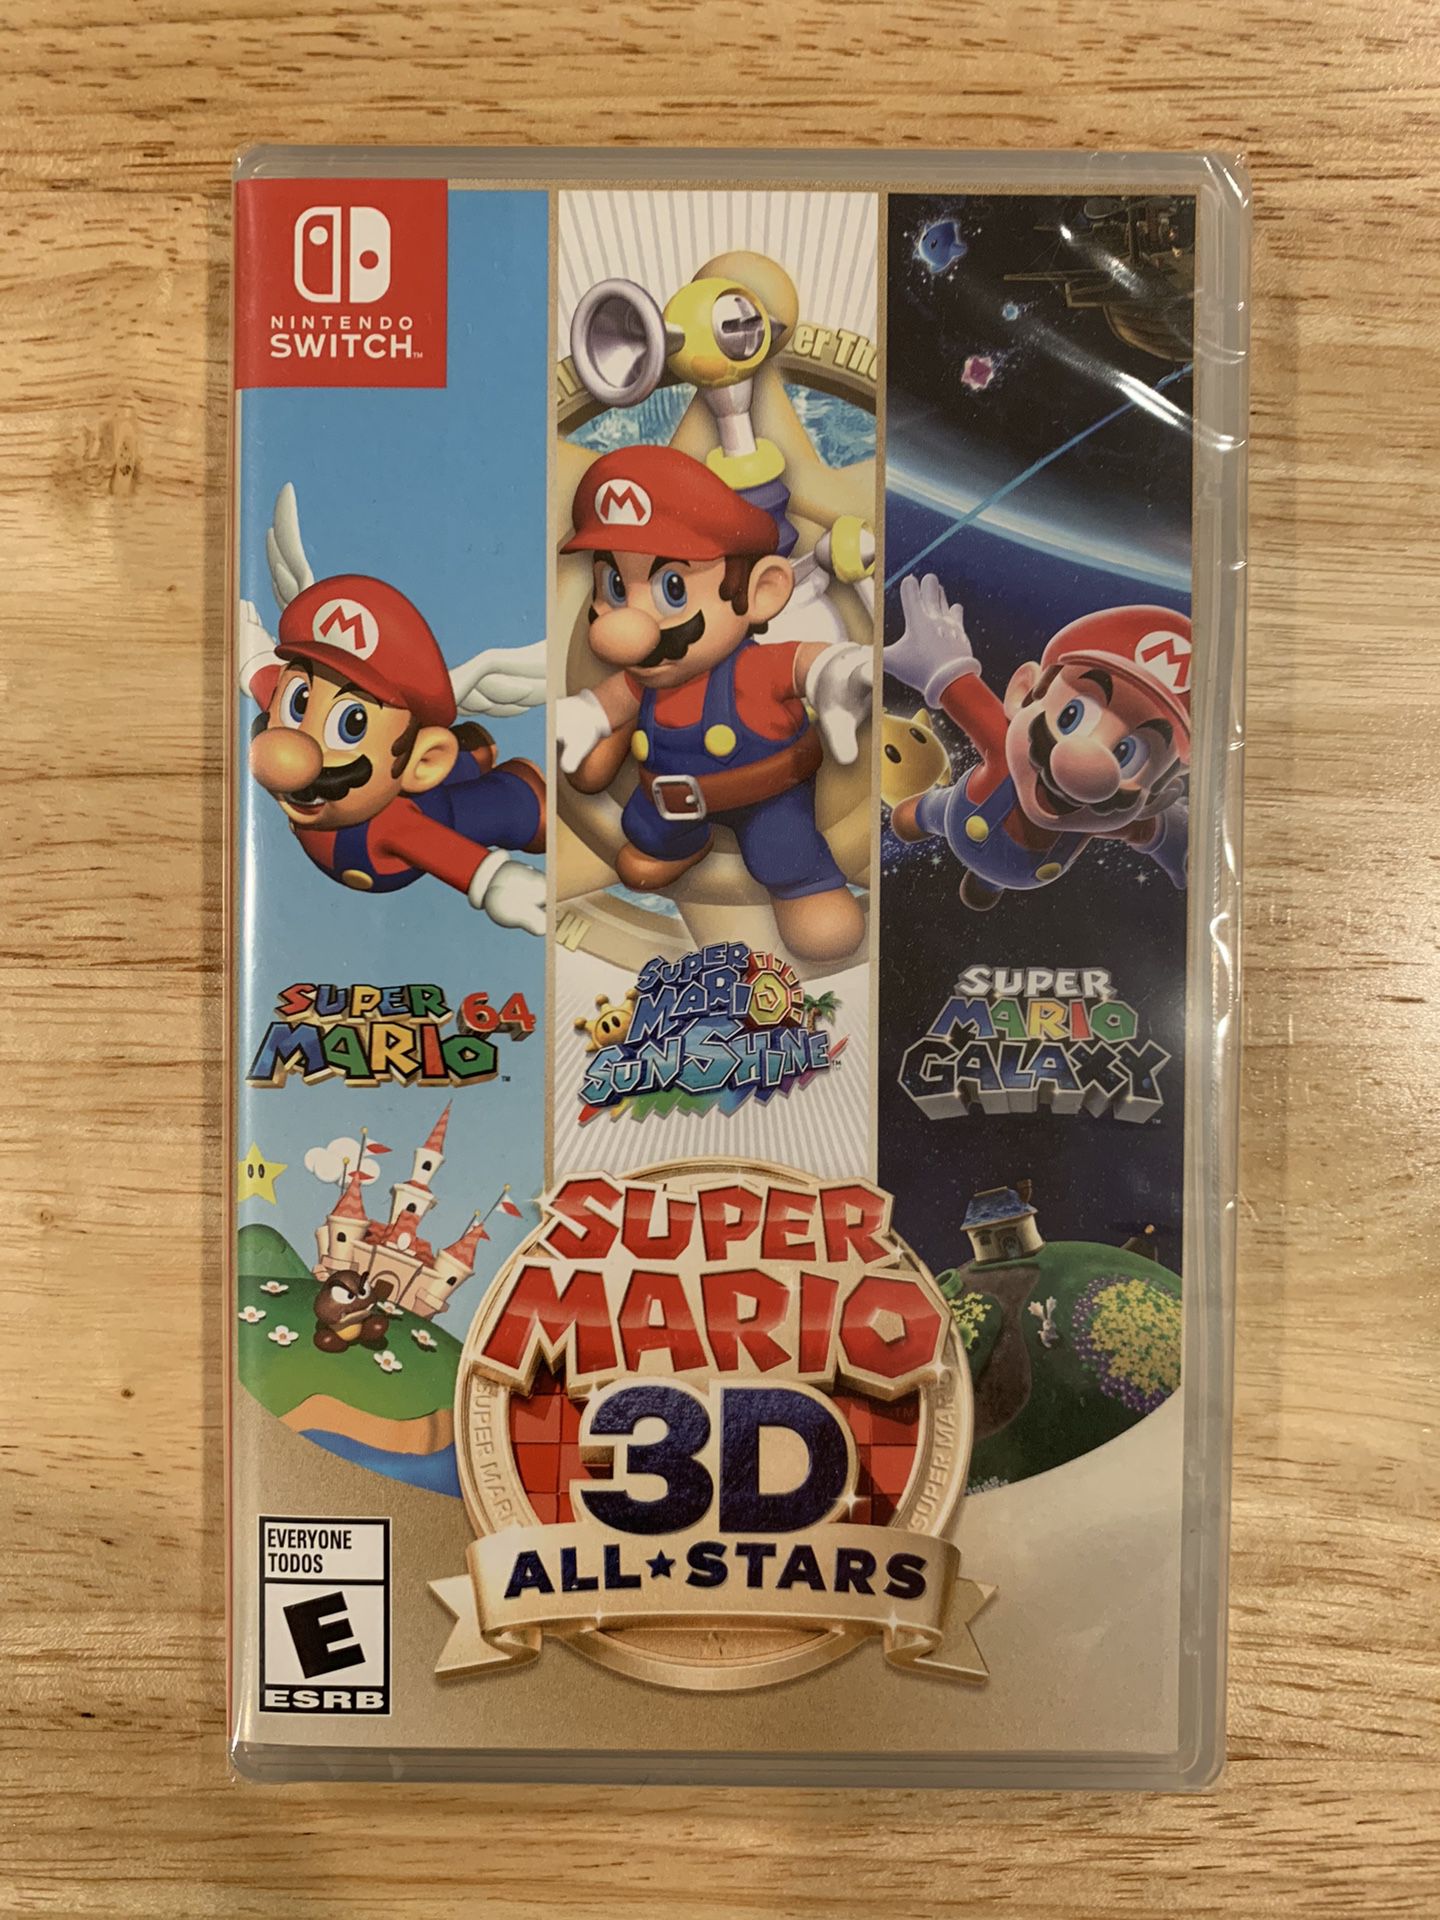 Super Mario 3D All-Stars for the Nintendo Switch - Bundle